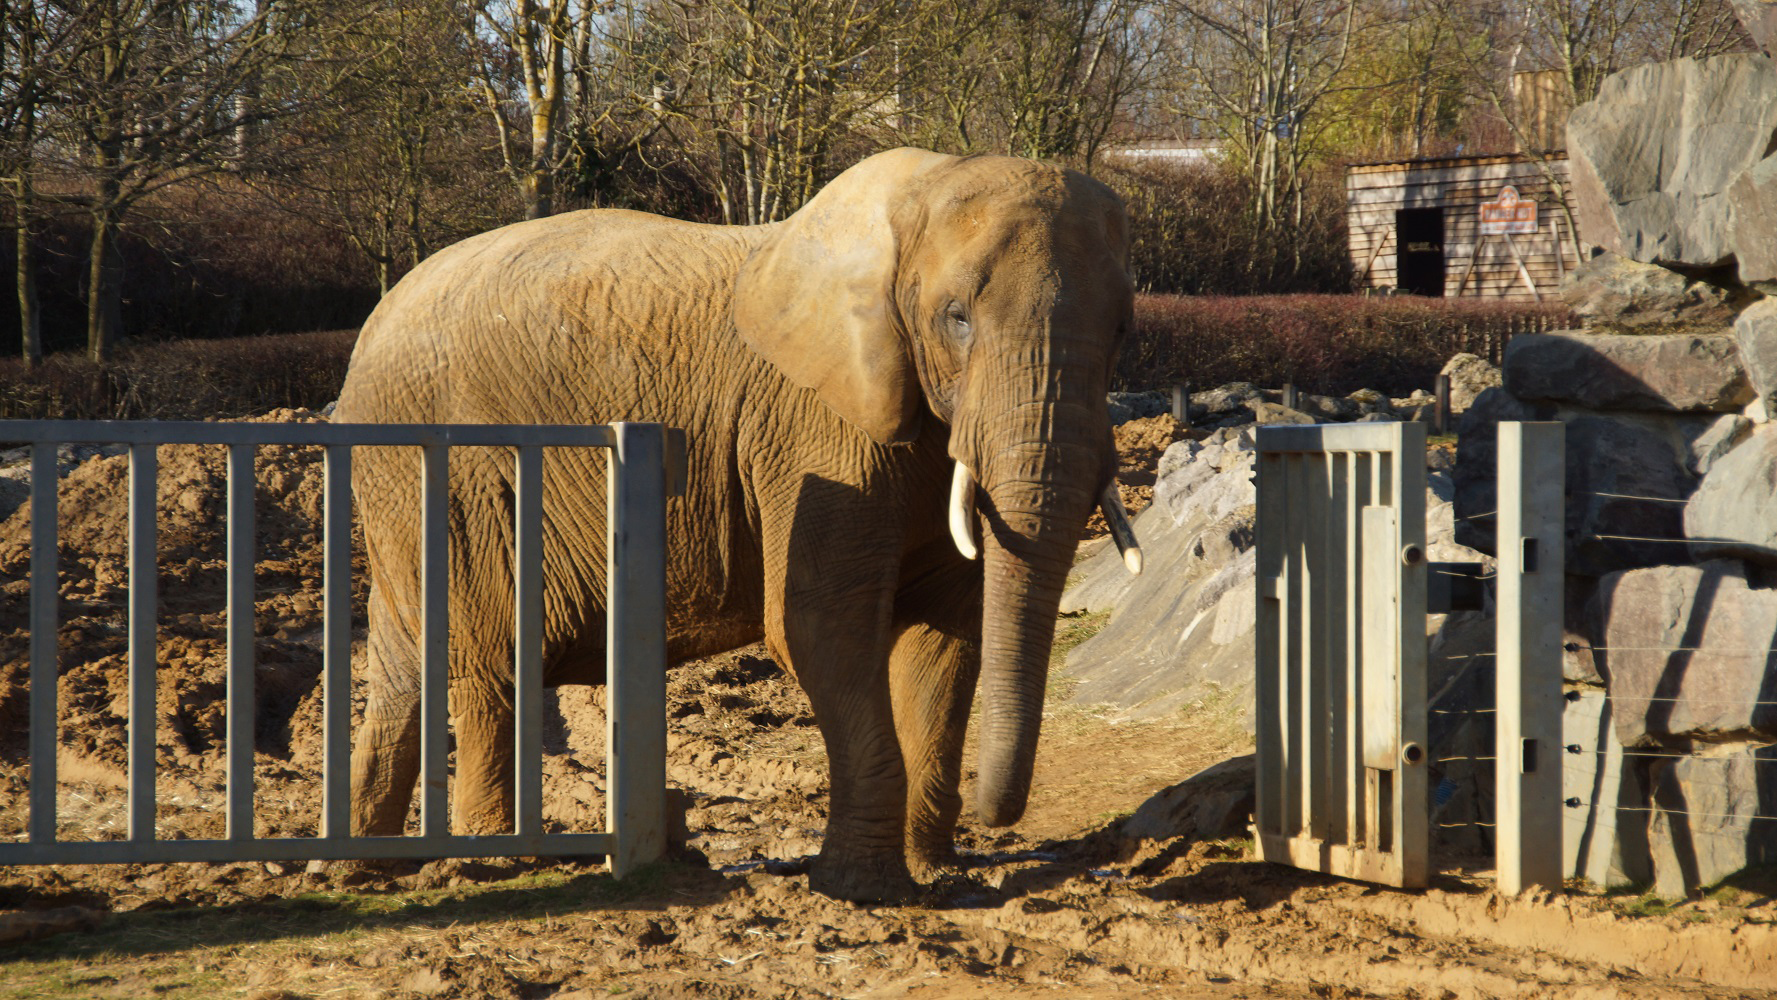 An elephant stands at the entrance to a zoo enclosure